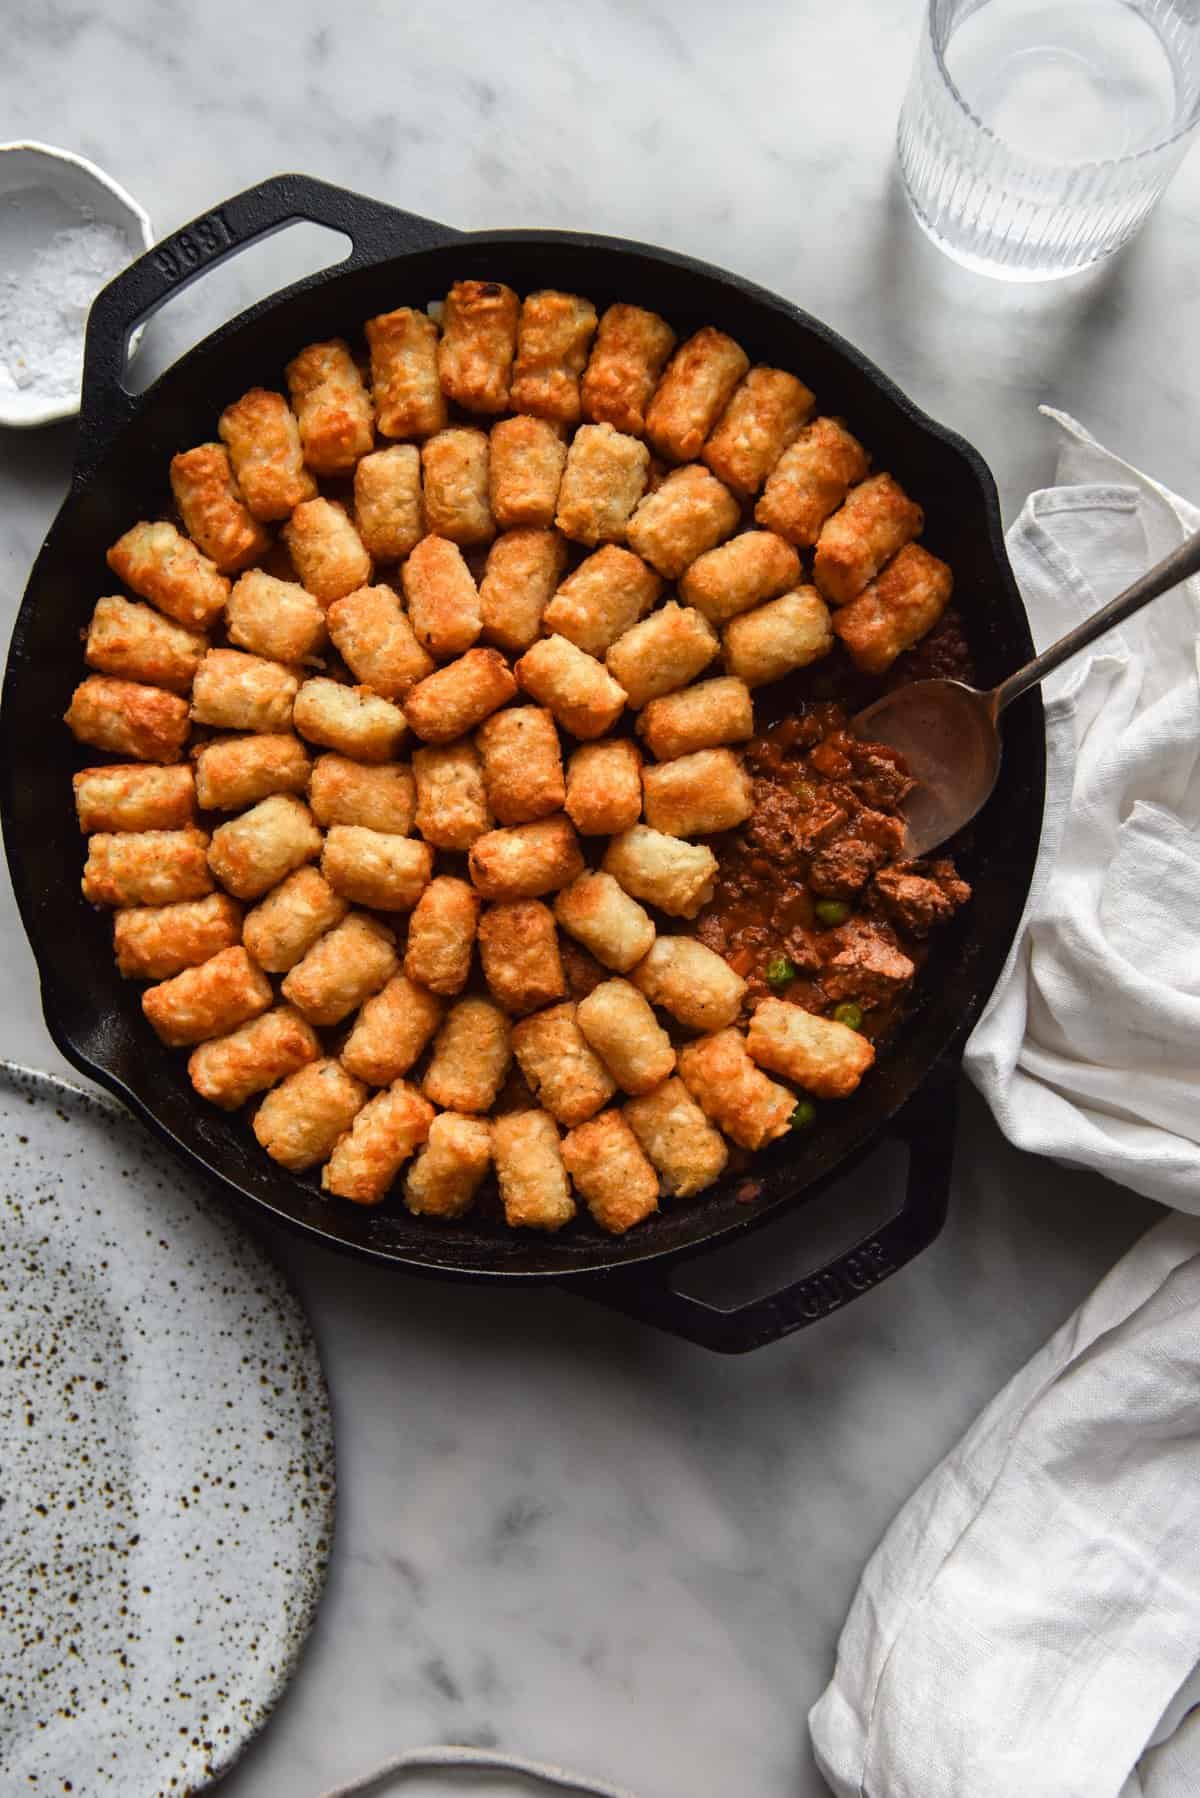 A vegan Shepherd's pie in a skillet topped with tater tots. The skillet sits on a white marble table surrounded by white plates and linen napkins